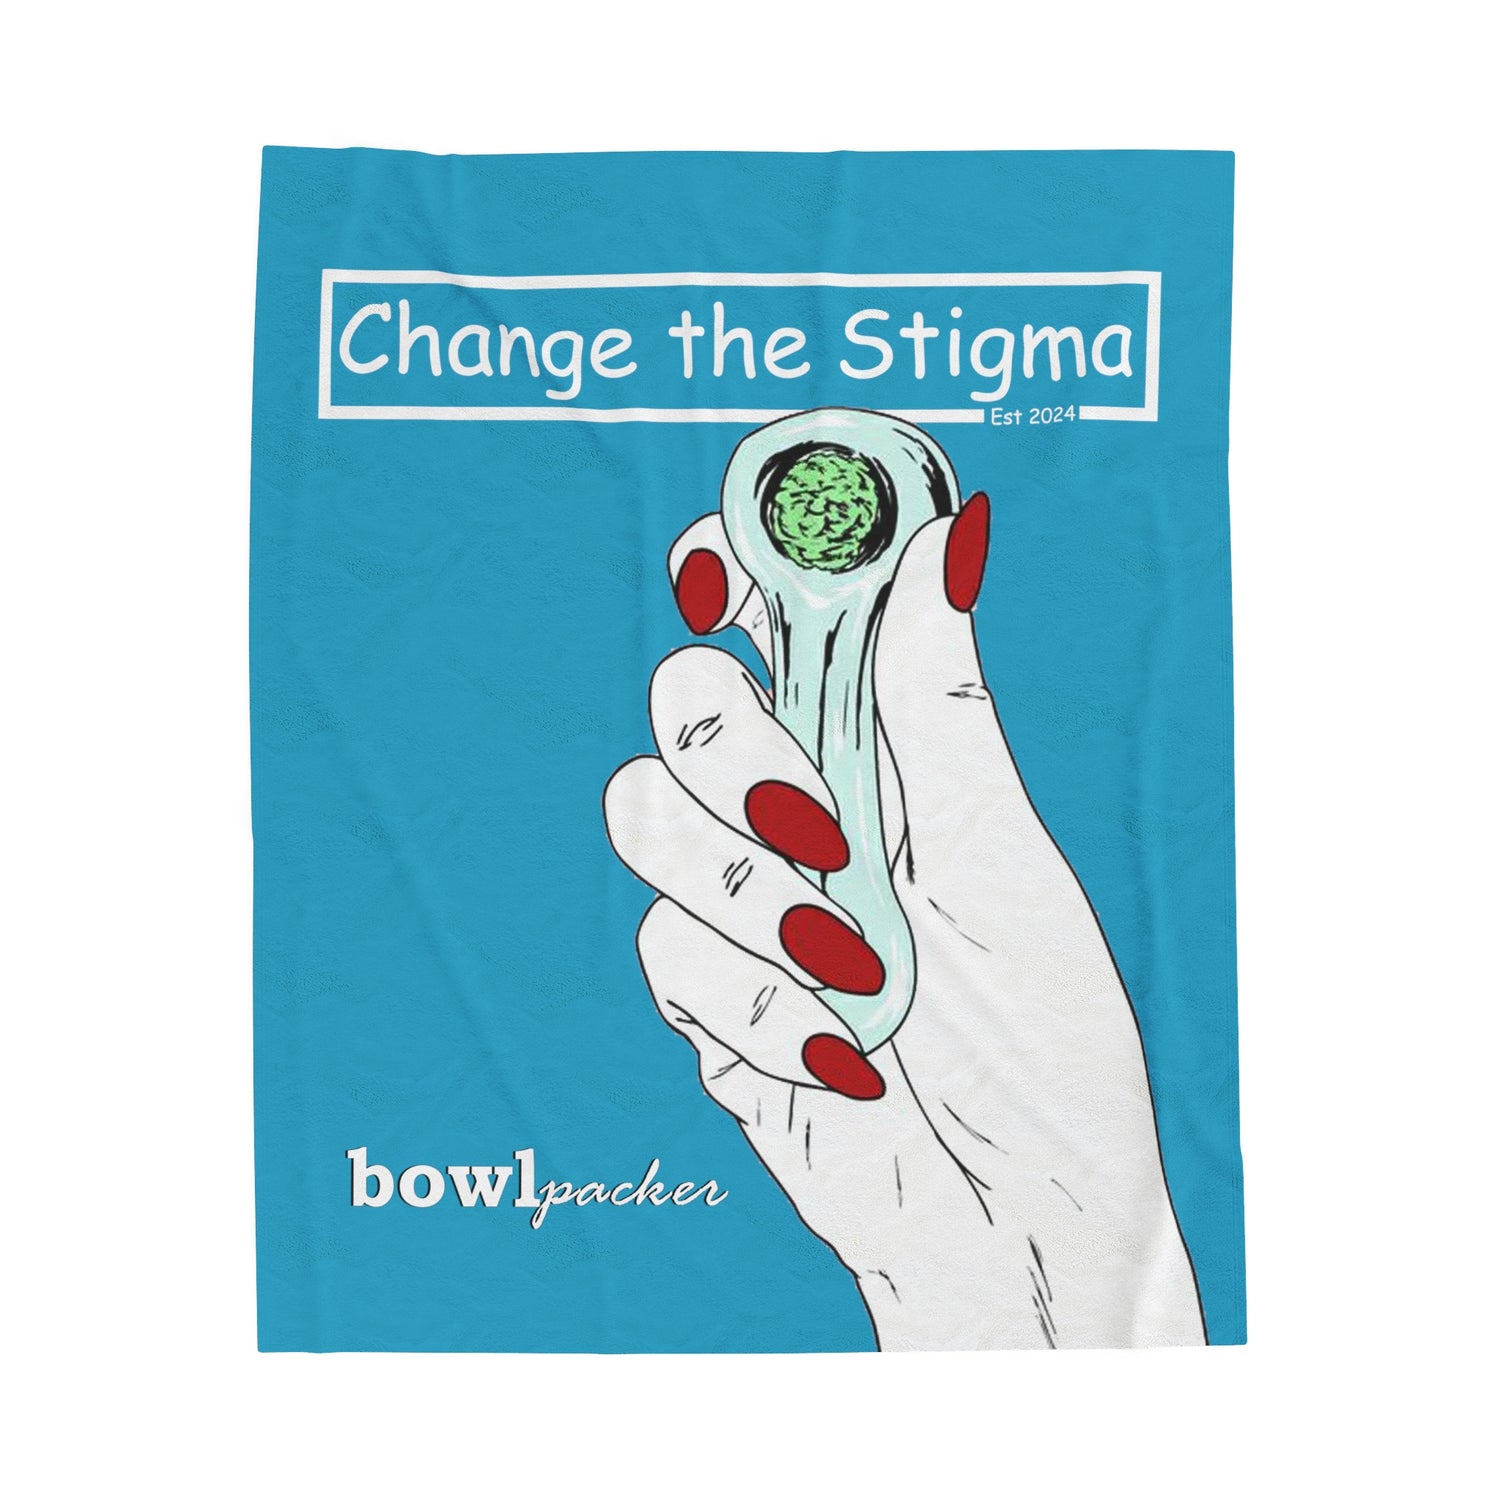 Change the Stigma, Turquoise background, a woman with red nails holding a packed cannabis pipe with fresh cannabis present. It also says "Bowl packer". 50"x60" size